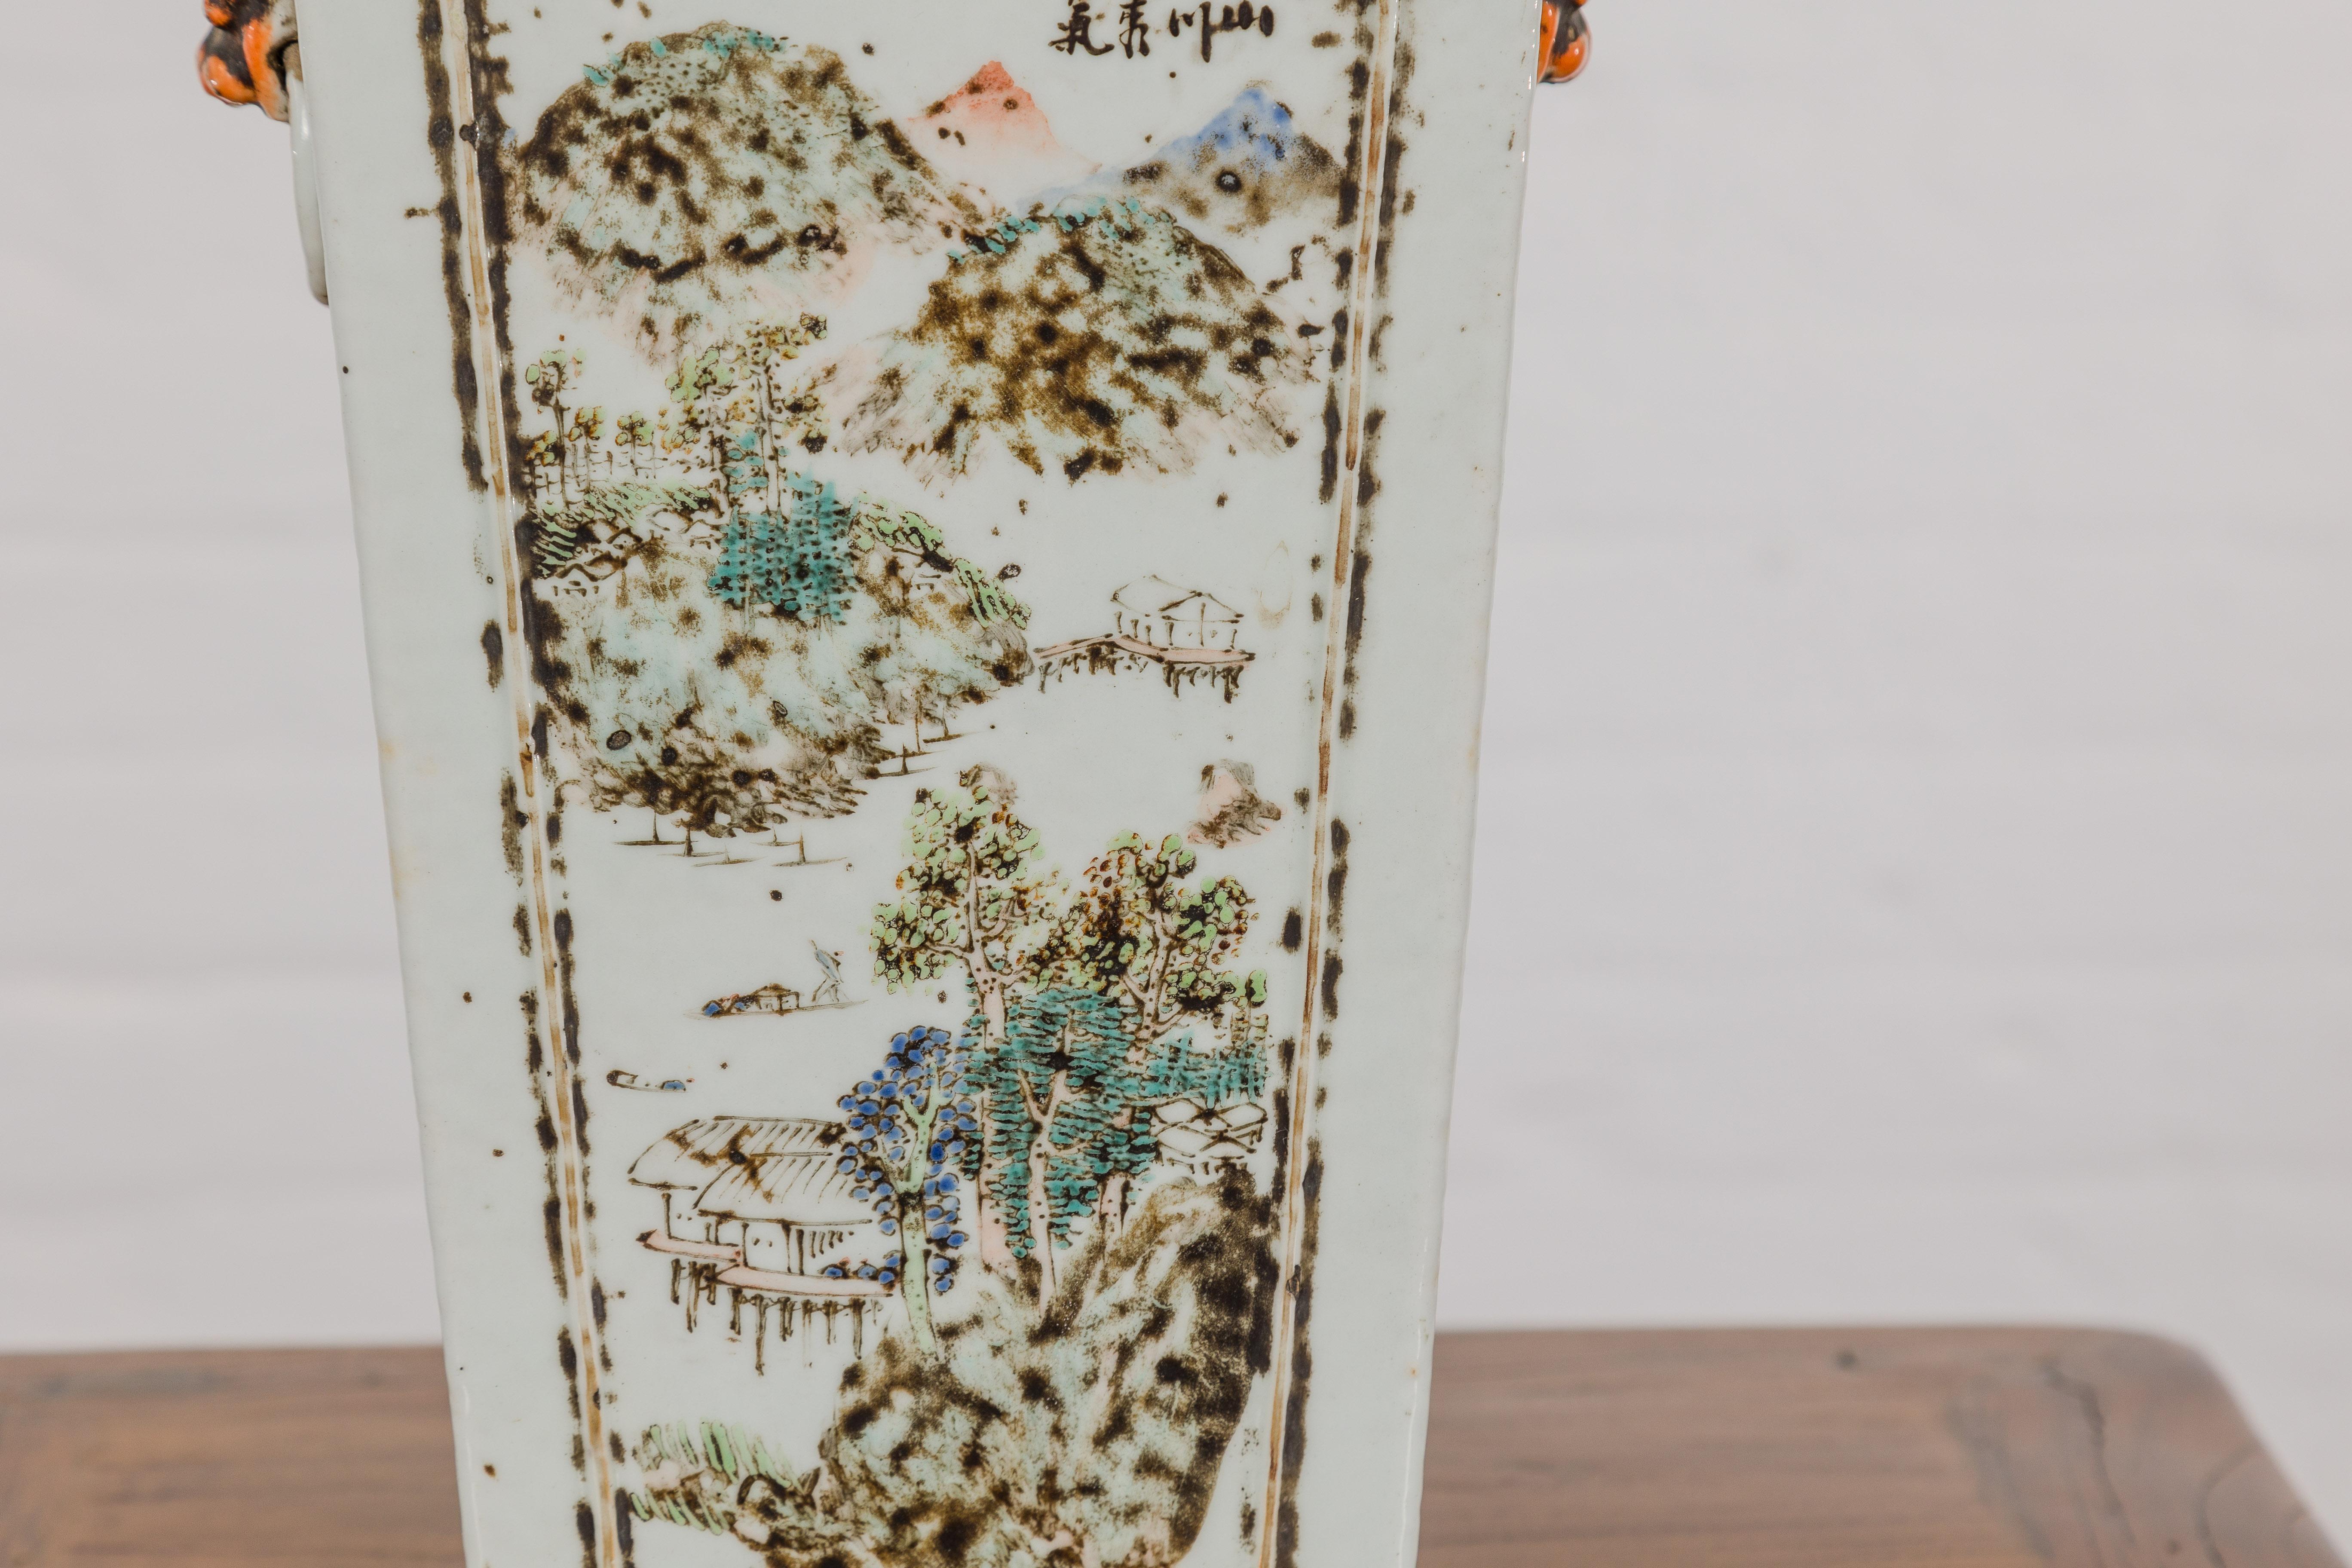 Qing Dynasty White Porcelain Vase with Painted Flowers, Objects and Calligraphy For Sale 9